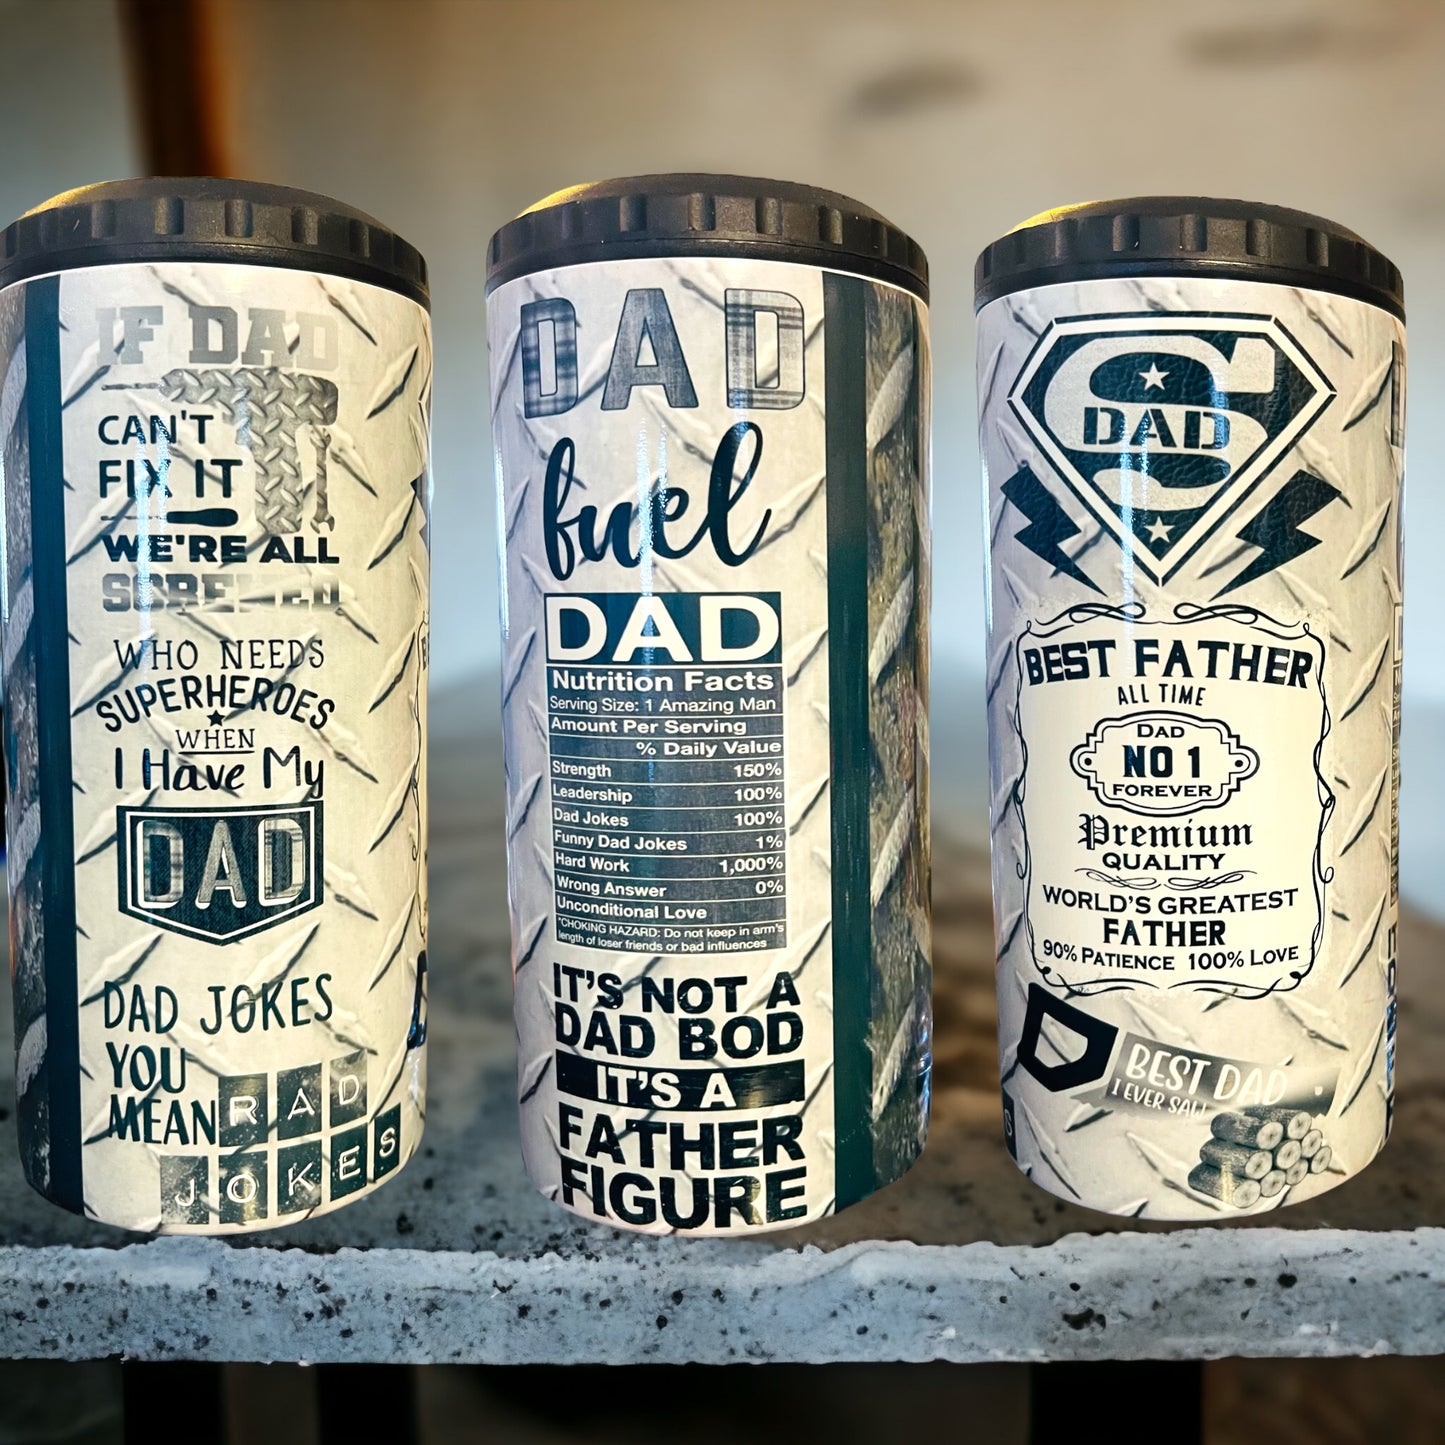 Dad 4in1 Can cooler – KG Creations Tx